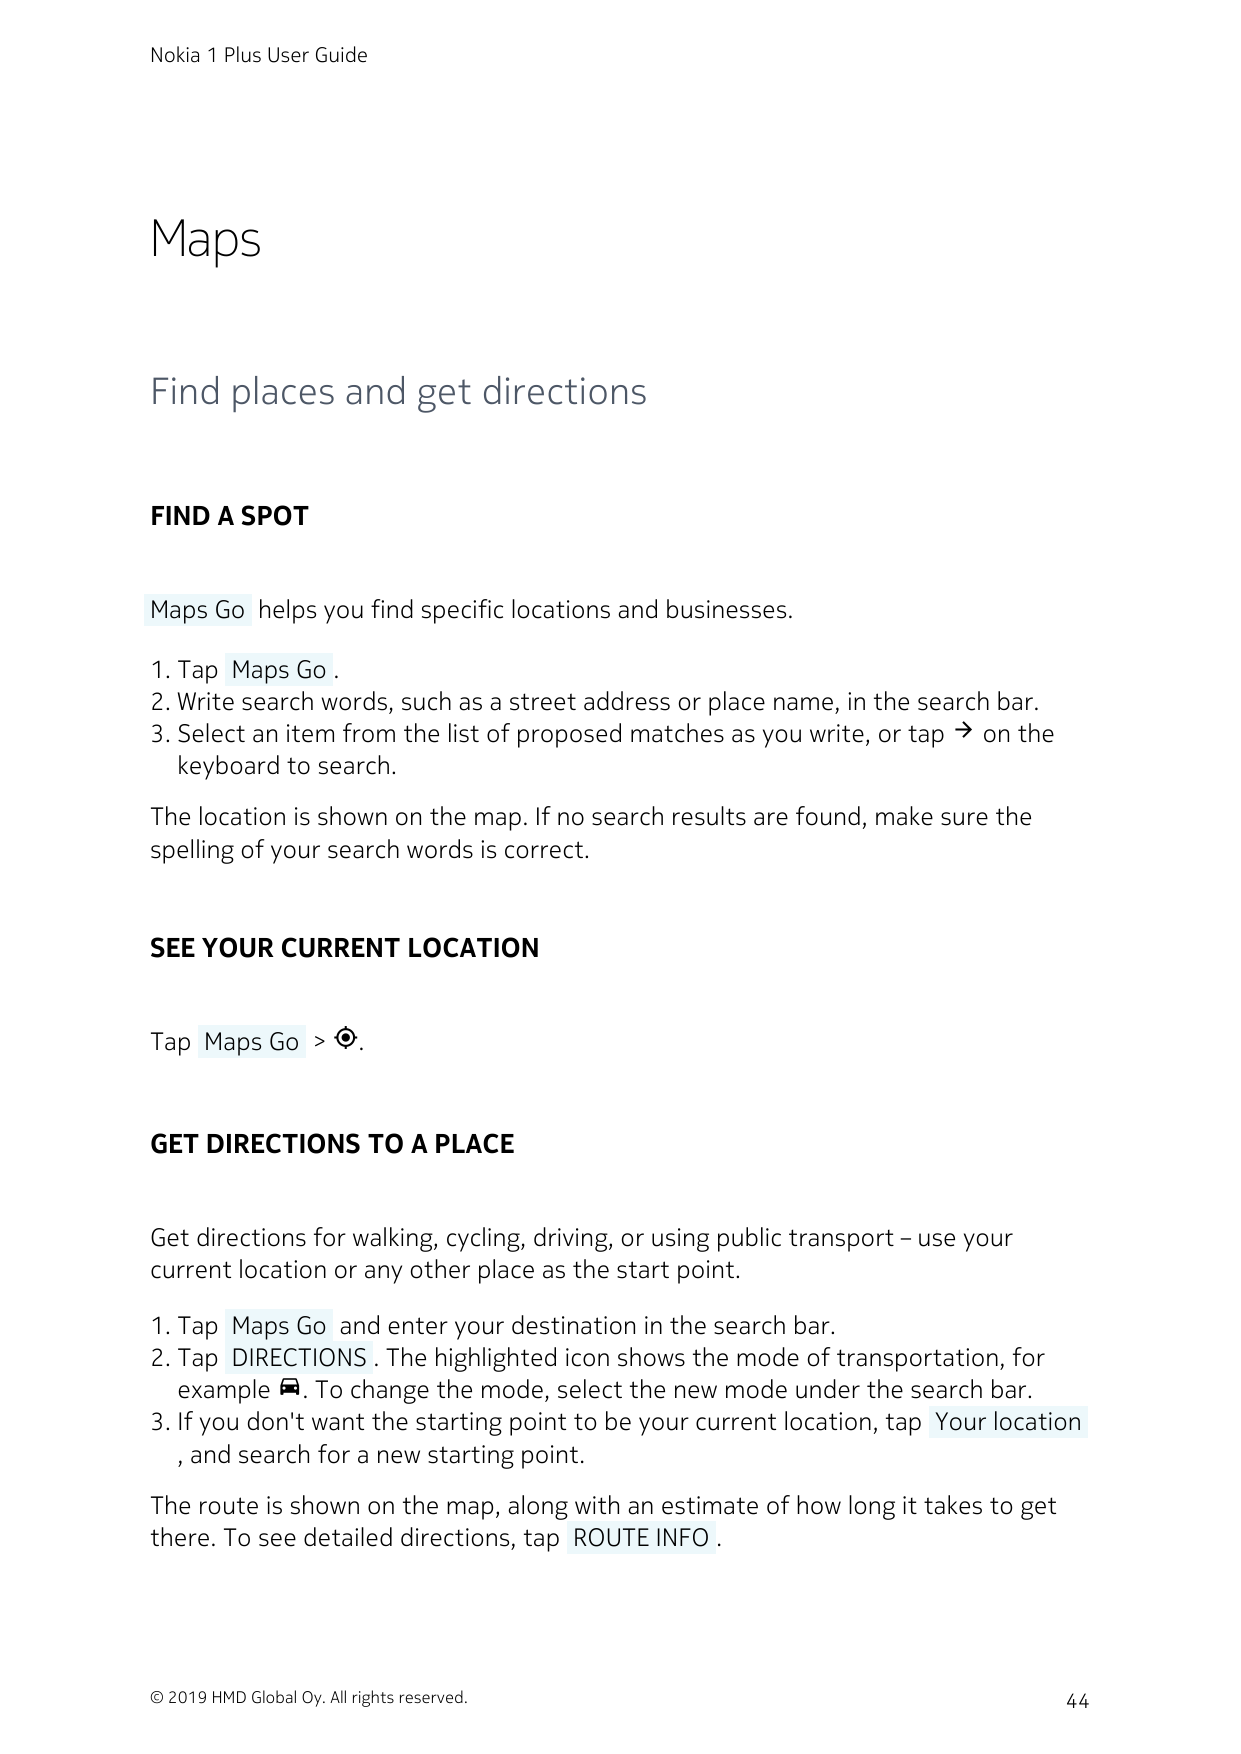 Nokia 1 Plus User GuideMapsFind places and get directionsFIND A SPOT Maps Go  helps you find specific locations and businesses.1